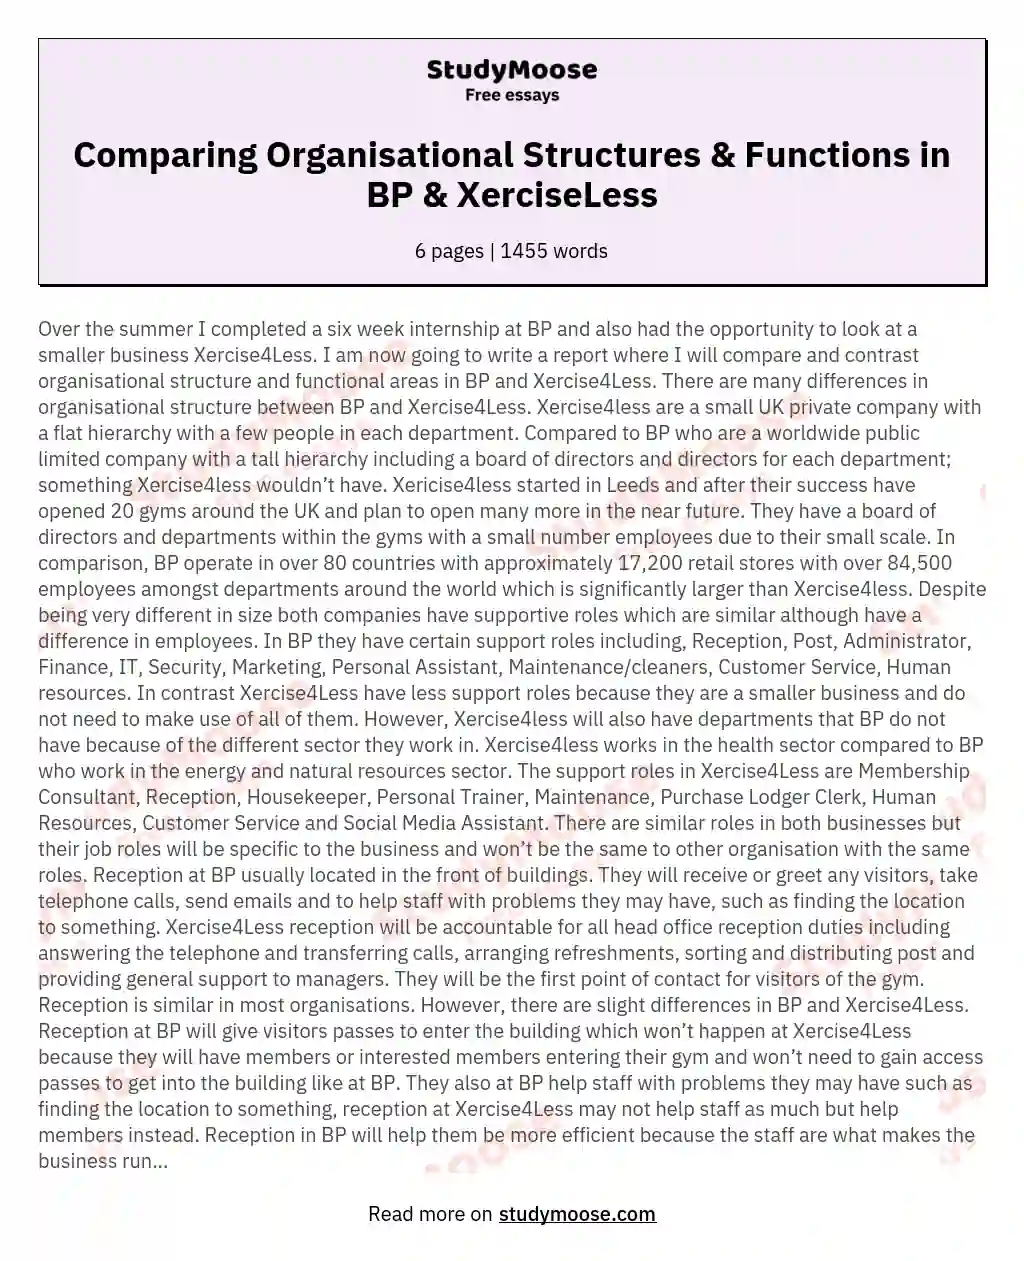 Comparing Organisational Structures & Functions in BP & XerciseLess essay